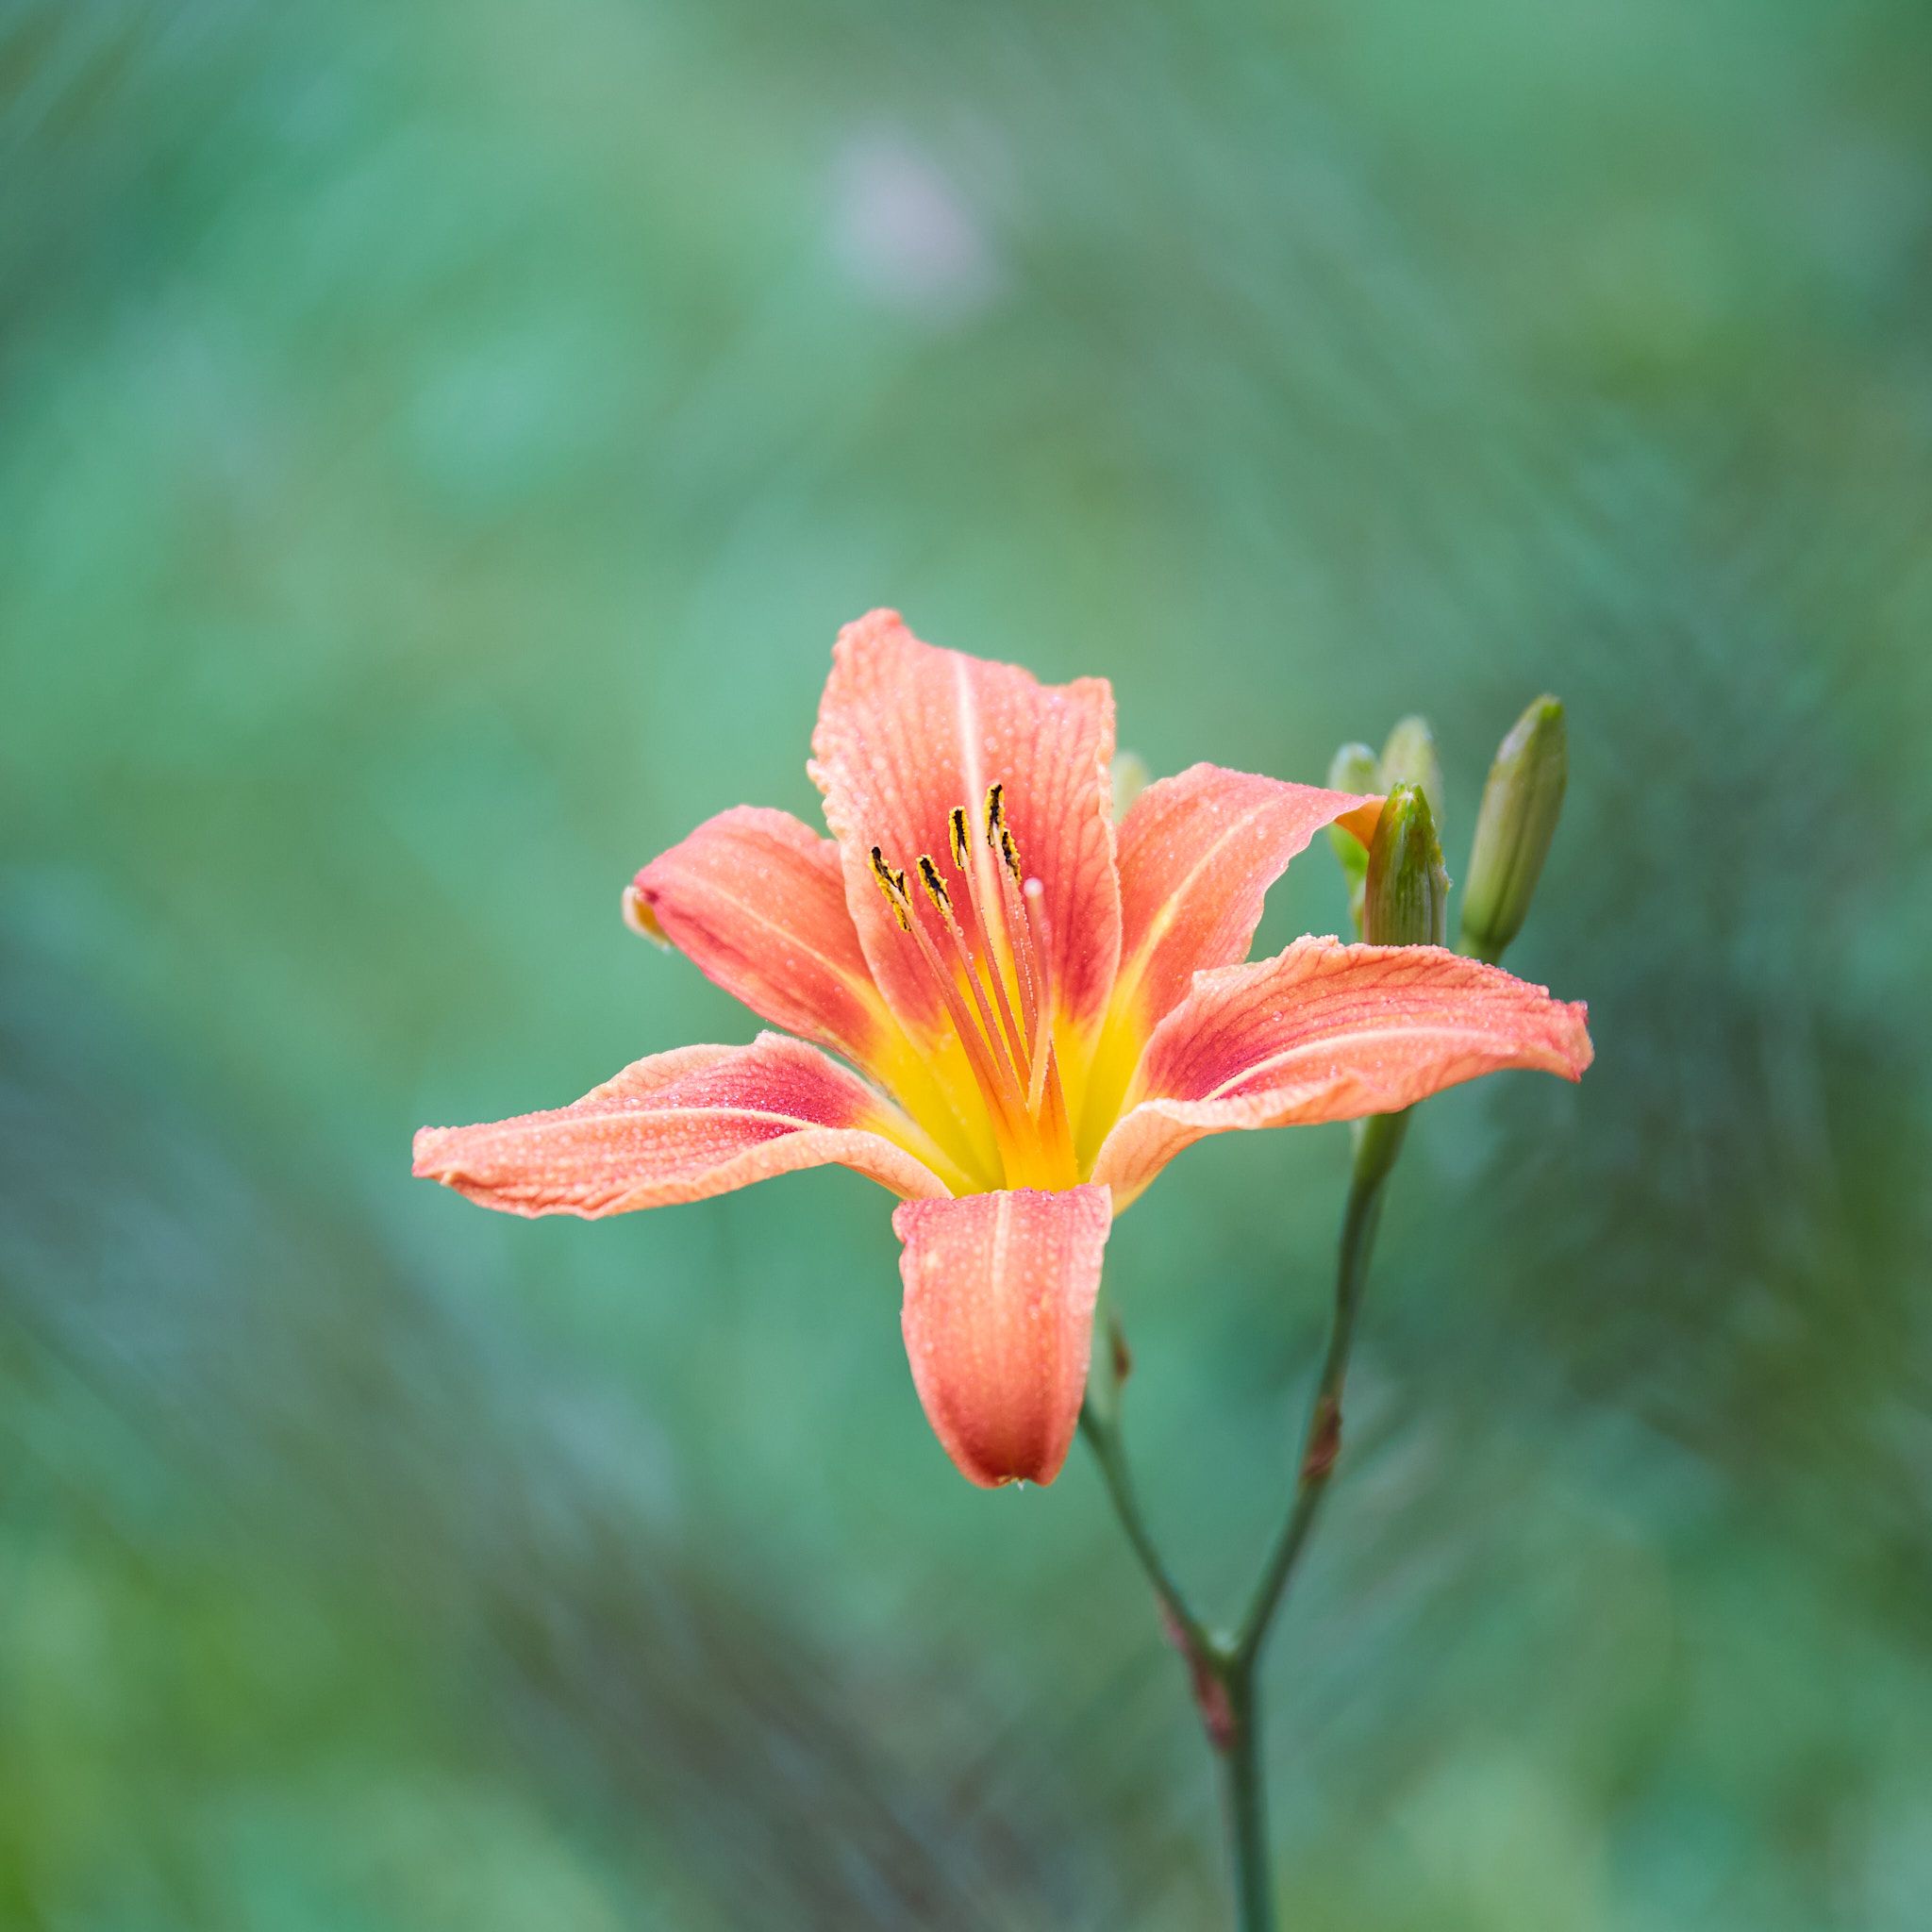 A red/orange flower glistens with water droplets.